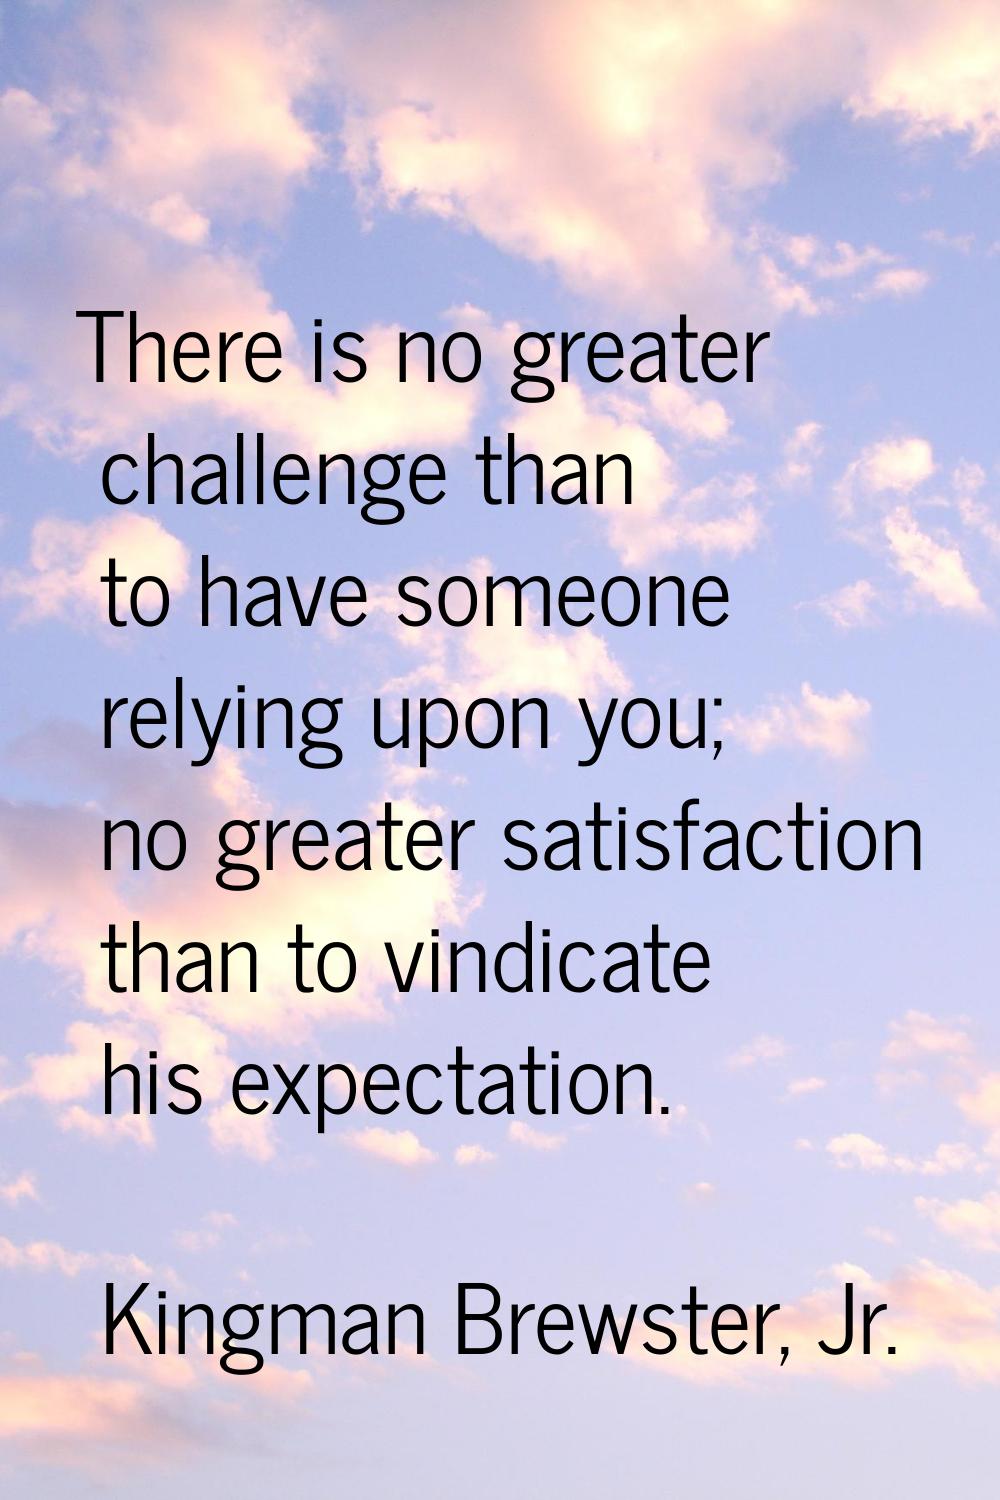 There is no greater challenge than to have someone relying upon you; no greater satisfaction than t